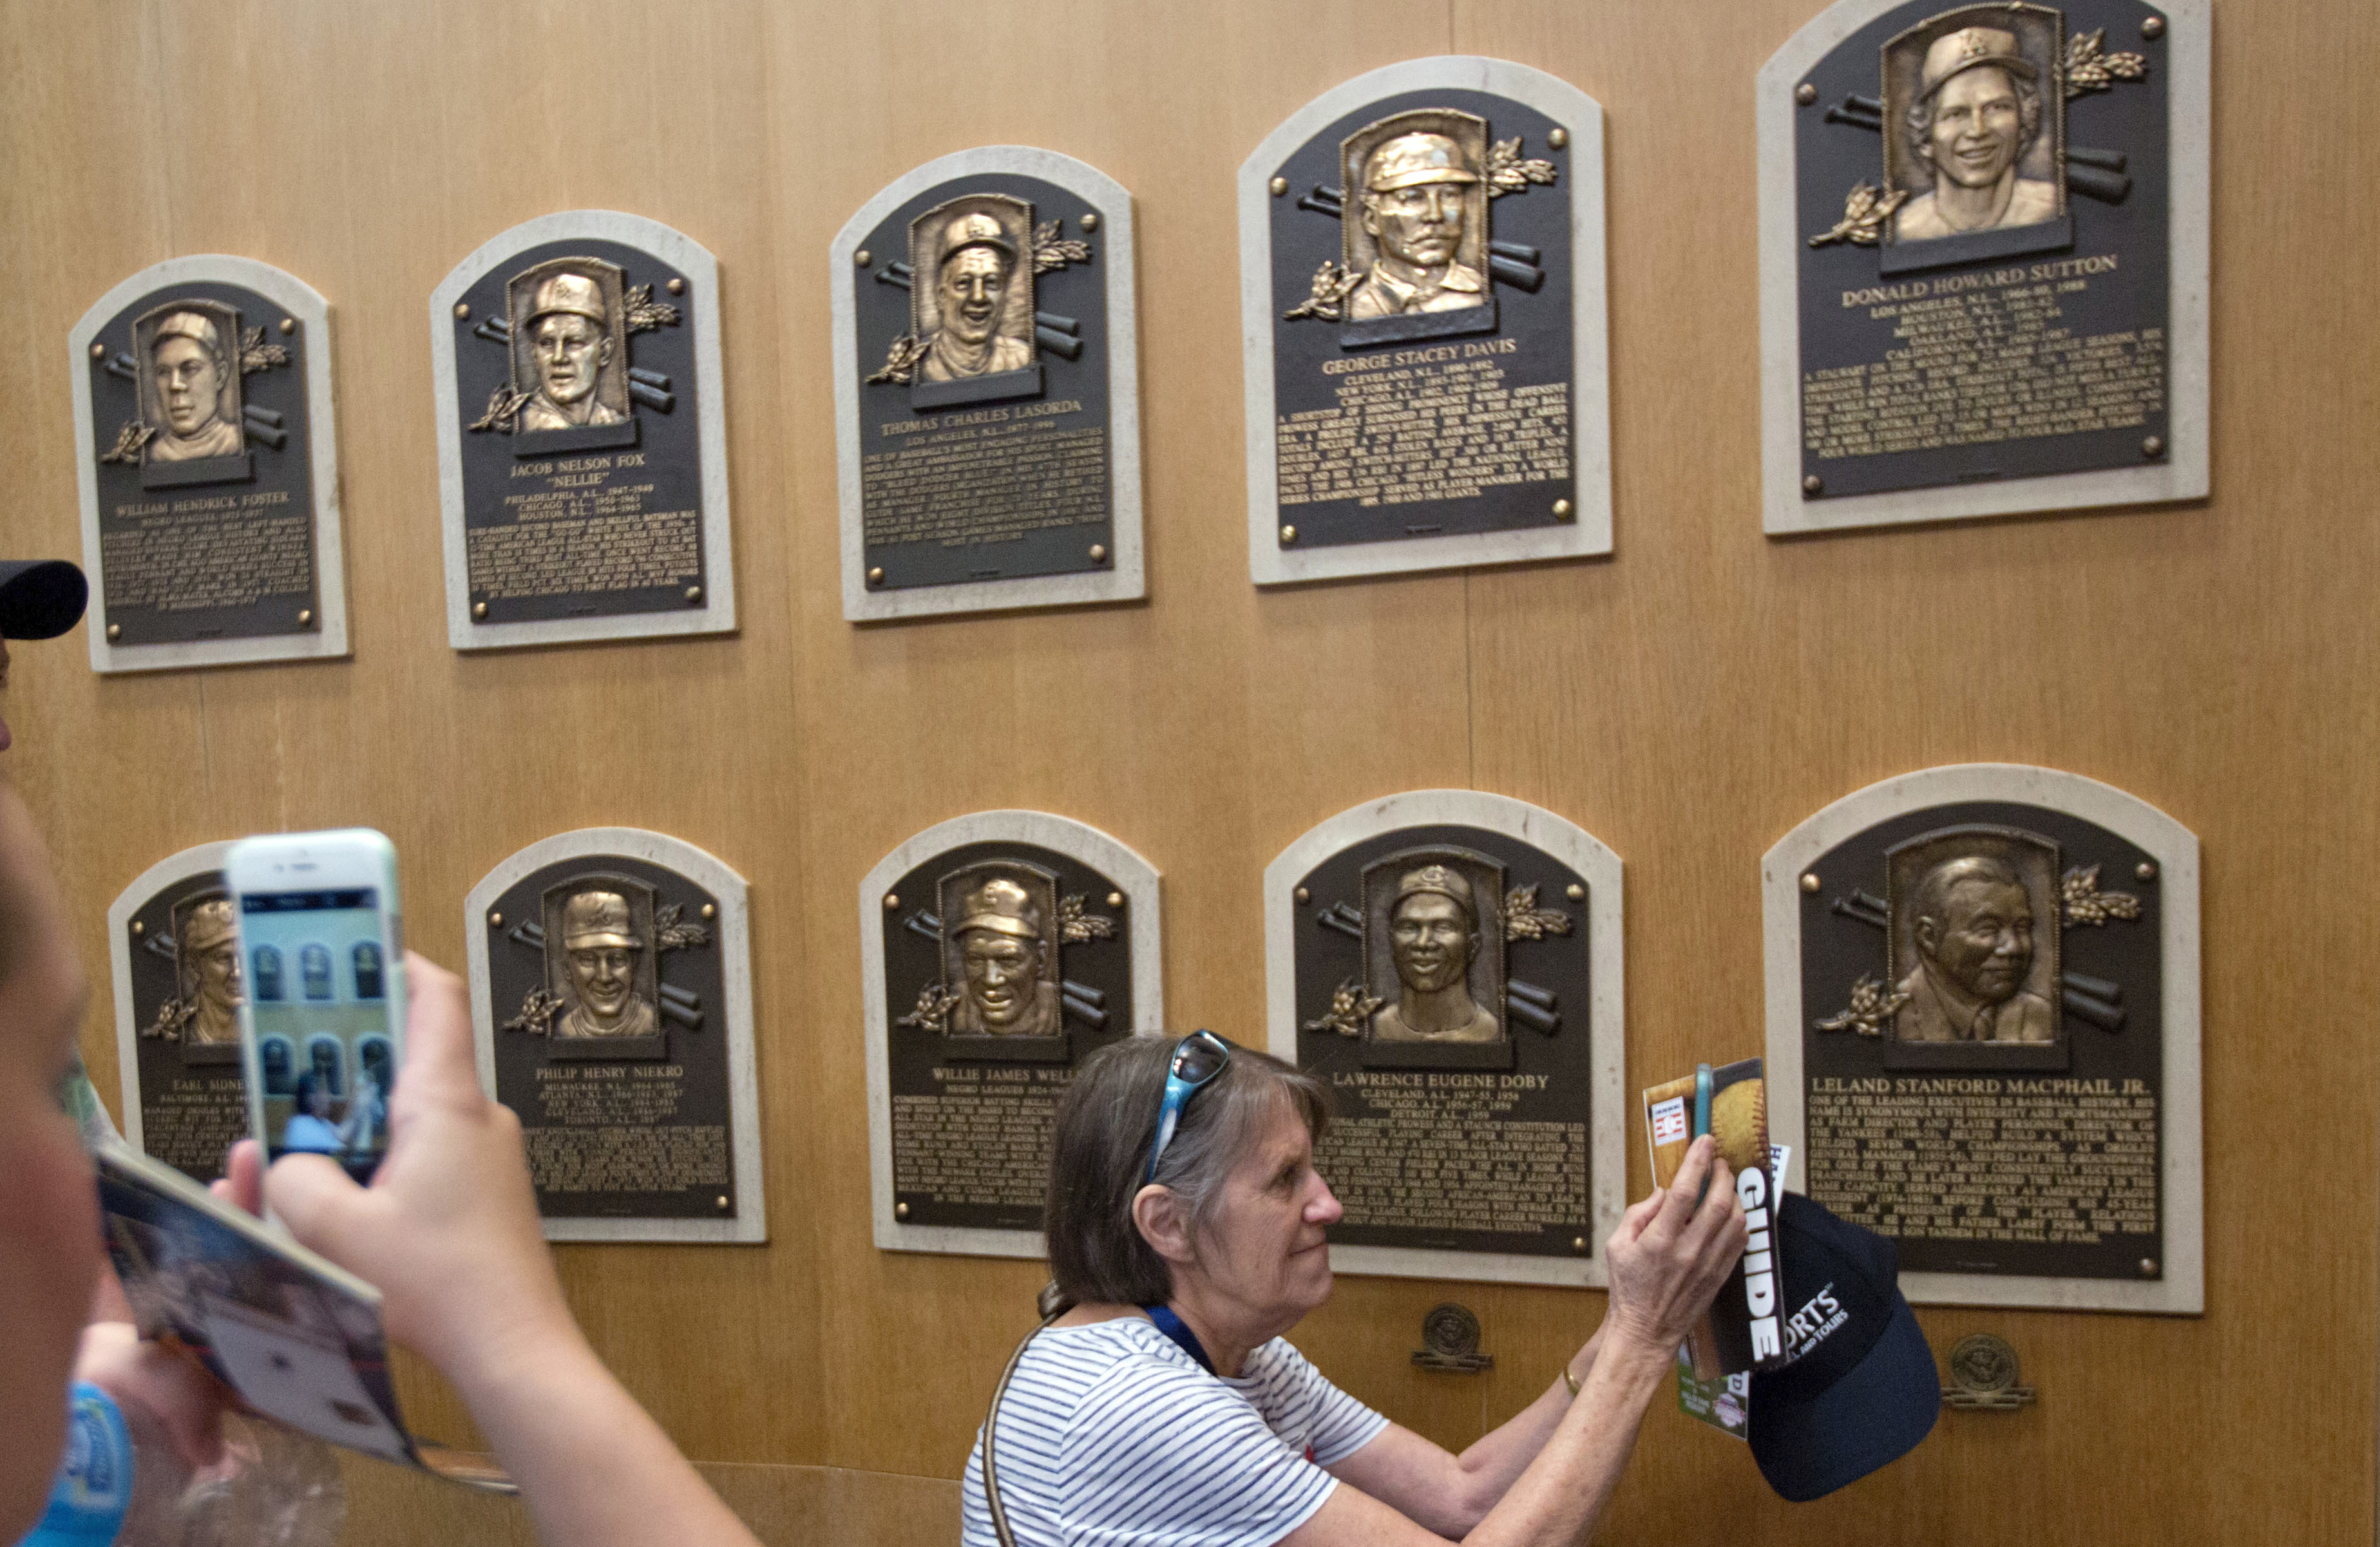 How to Plan Your Visit to the National Baseball Hall of Fame